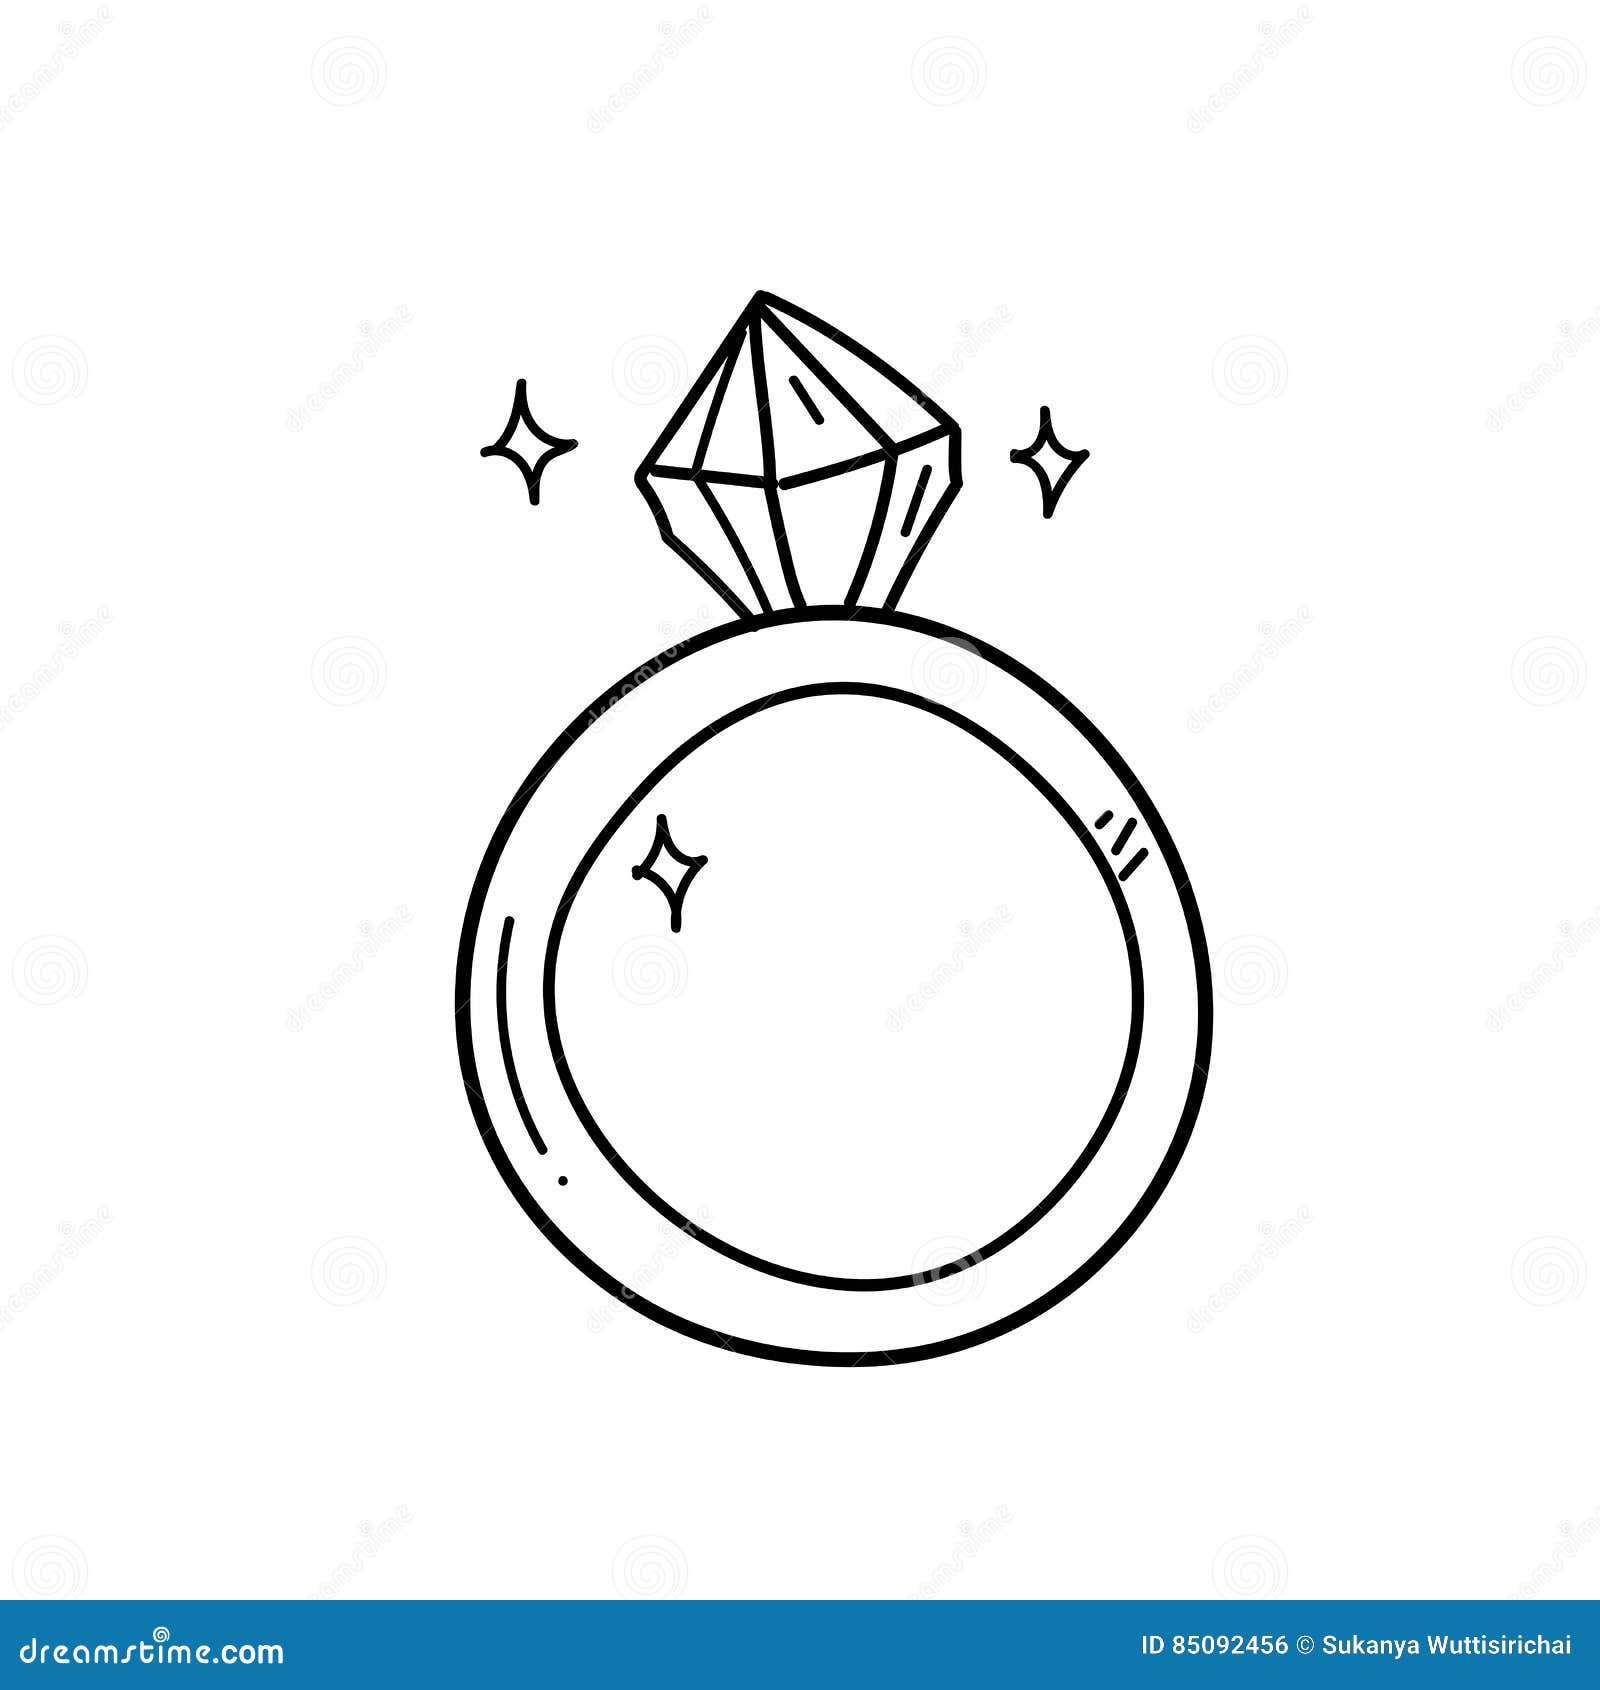 Engagement Ring Illustration Clipart PNG Transparent Background, Free  Download #45296 - FreeIconsPNG